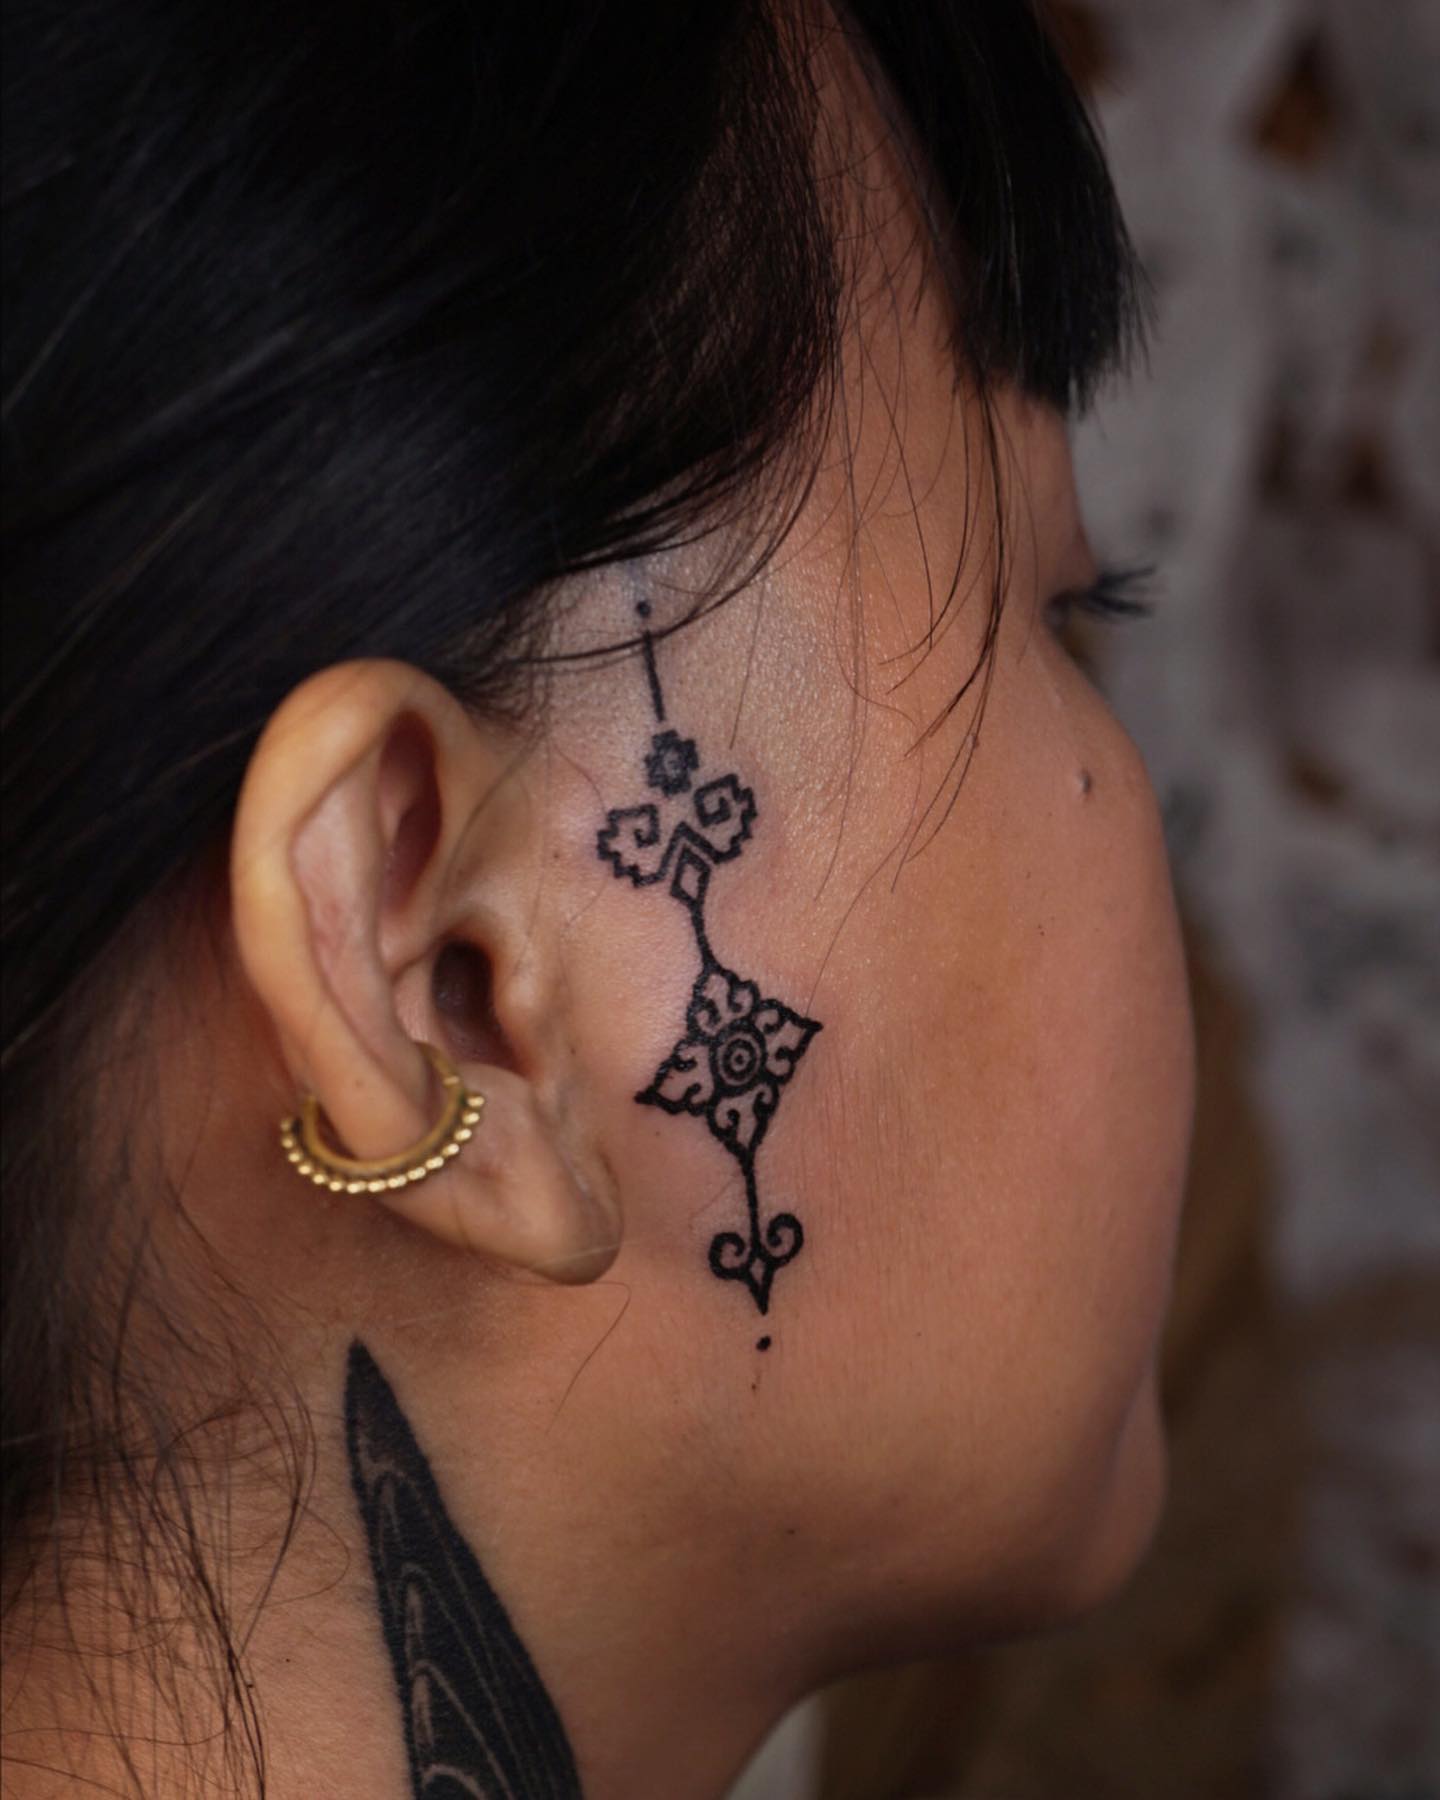 If you like mysterious and boho tattoos and you like to look retro, this face tattoo is for you. It is a spiritual piece that most women will enjoy.